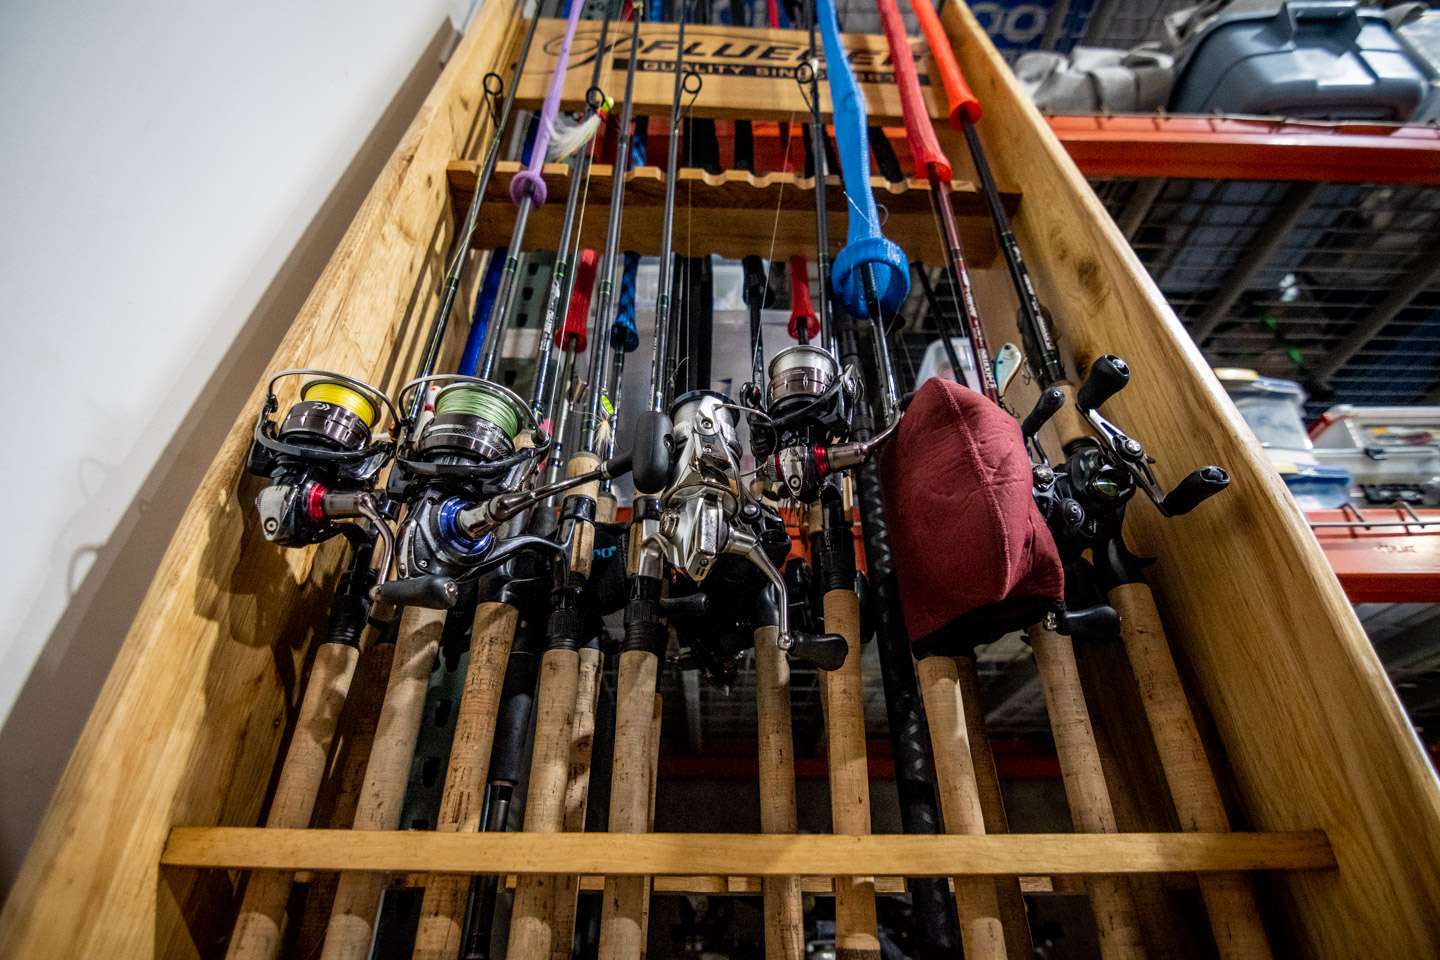 This rack holds most of his spinning reels with a few baitcasters included.